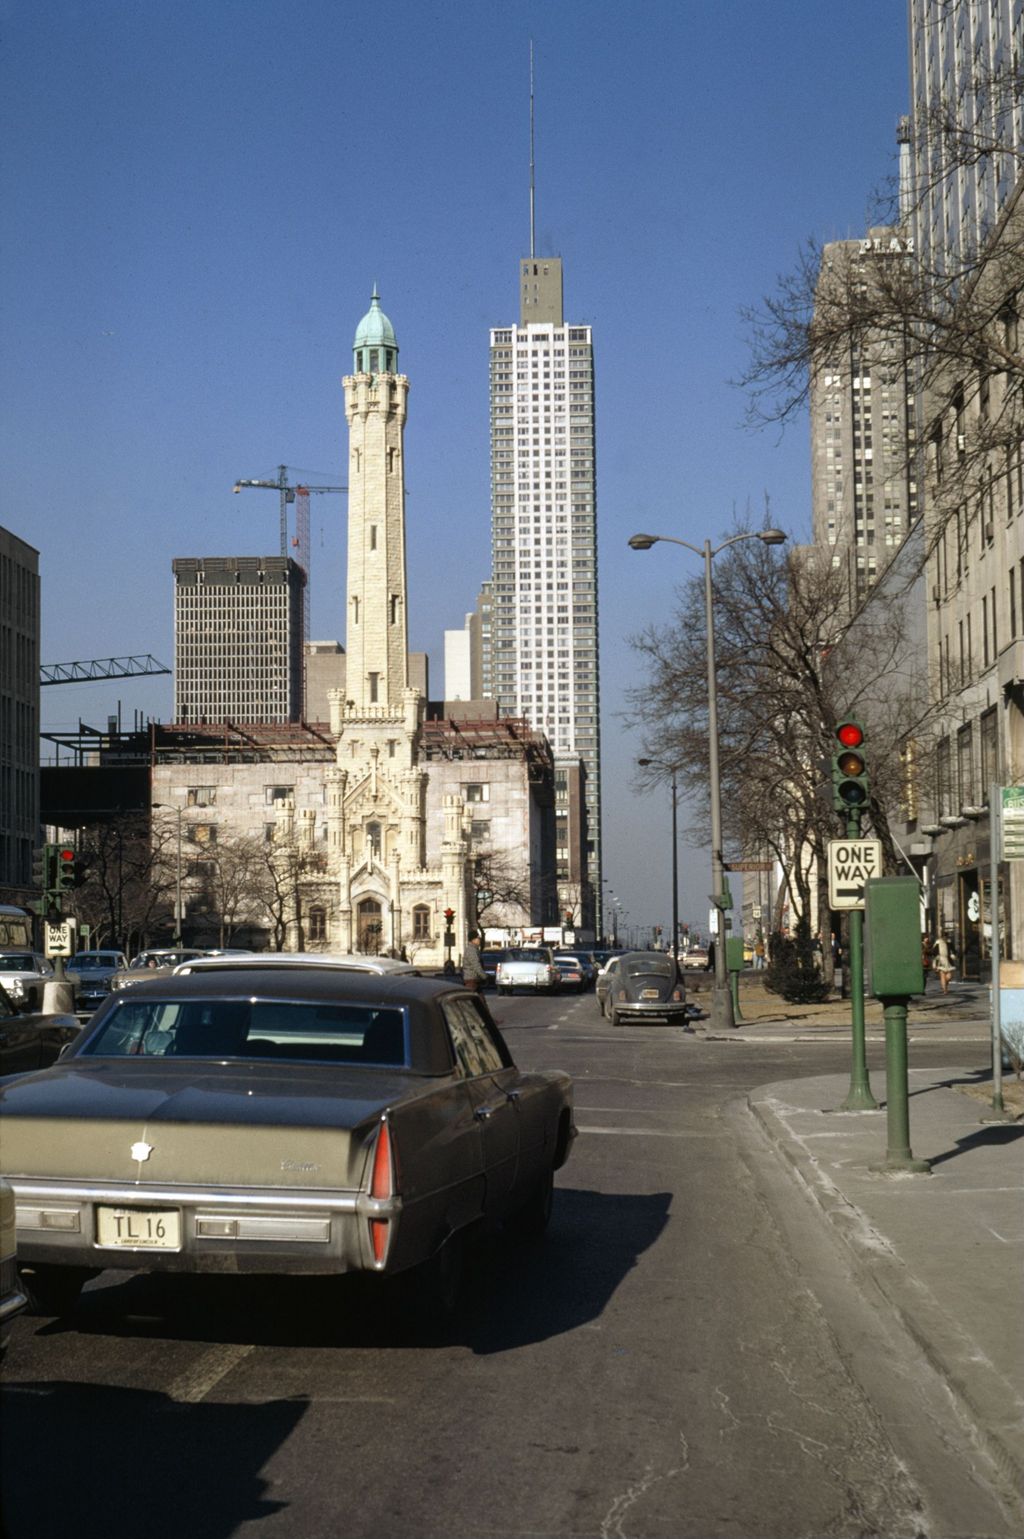 Miniature of Michigan Avenue and Chicago Water Tower